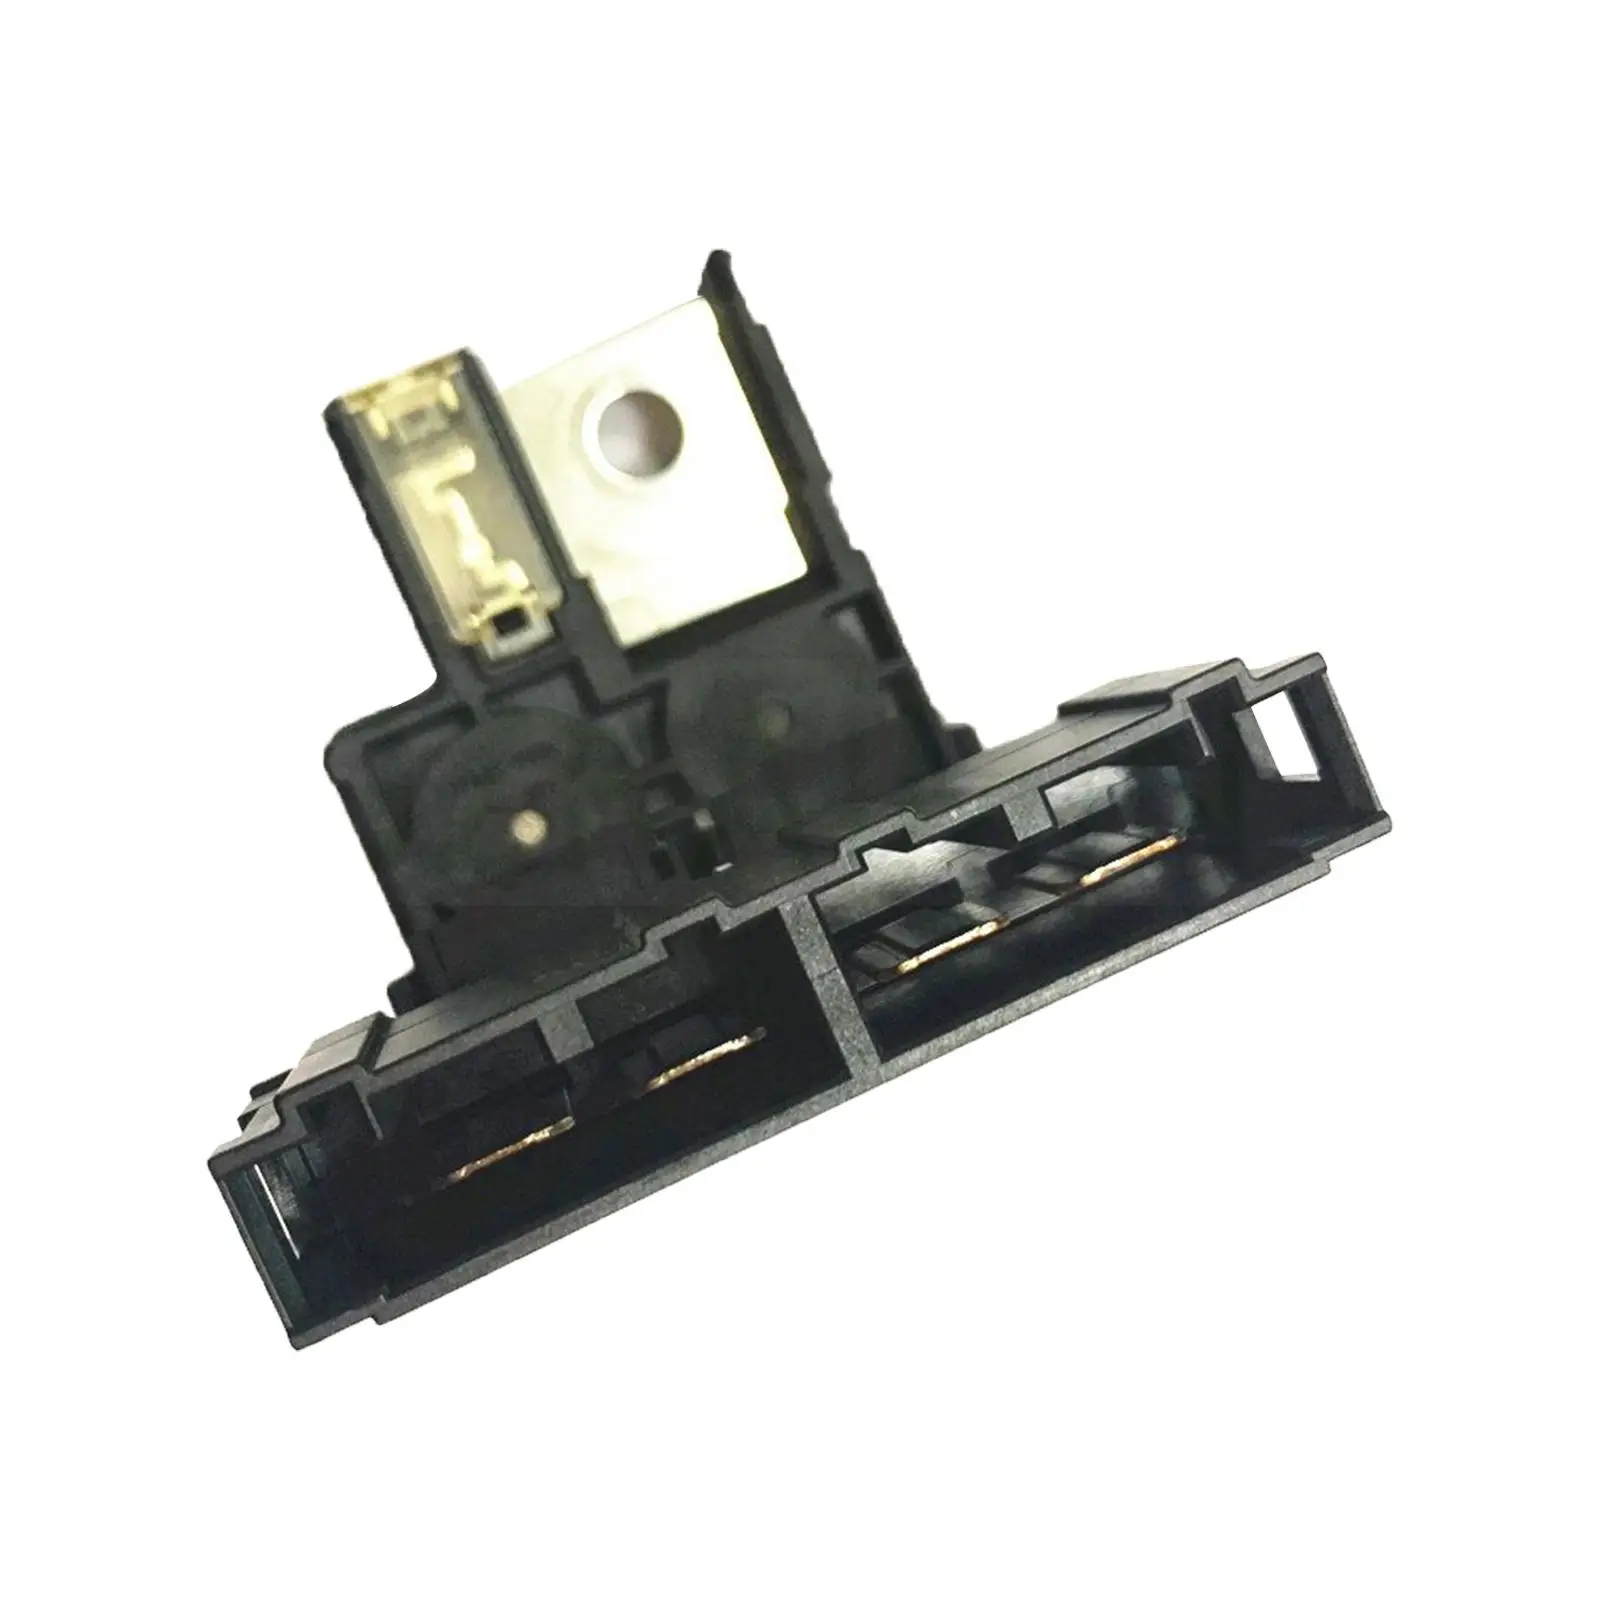 Battery Circuit Fuse Replaces, 24380-79912 ,Premium ,High Performance, Durable